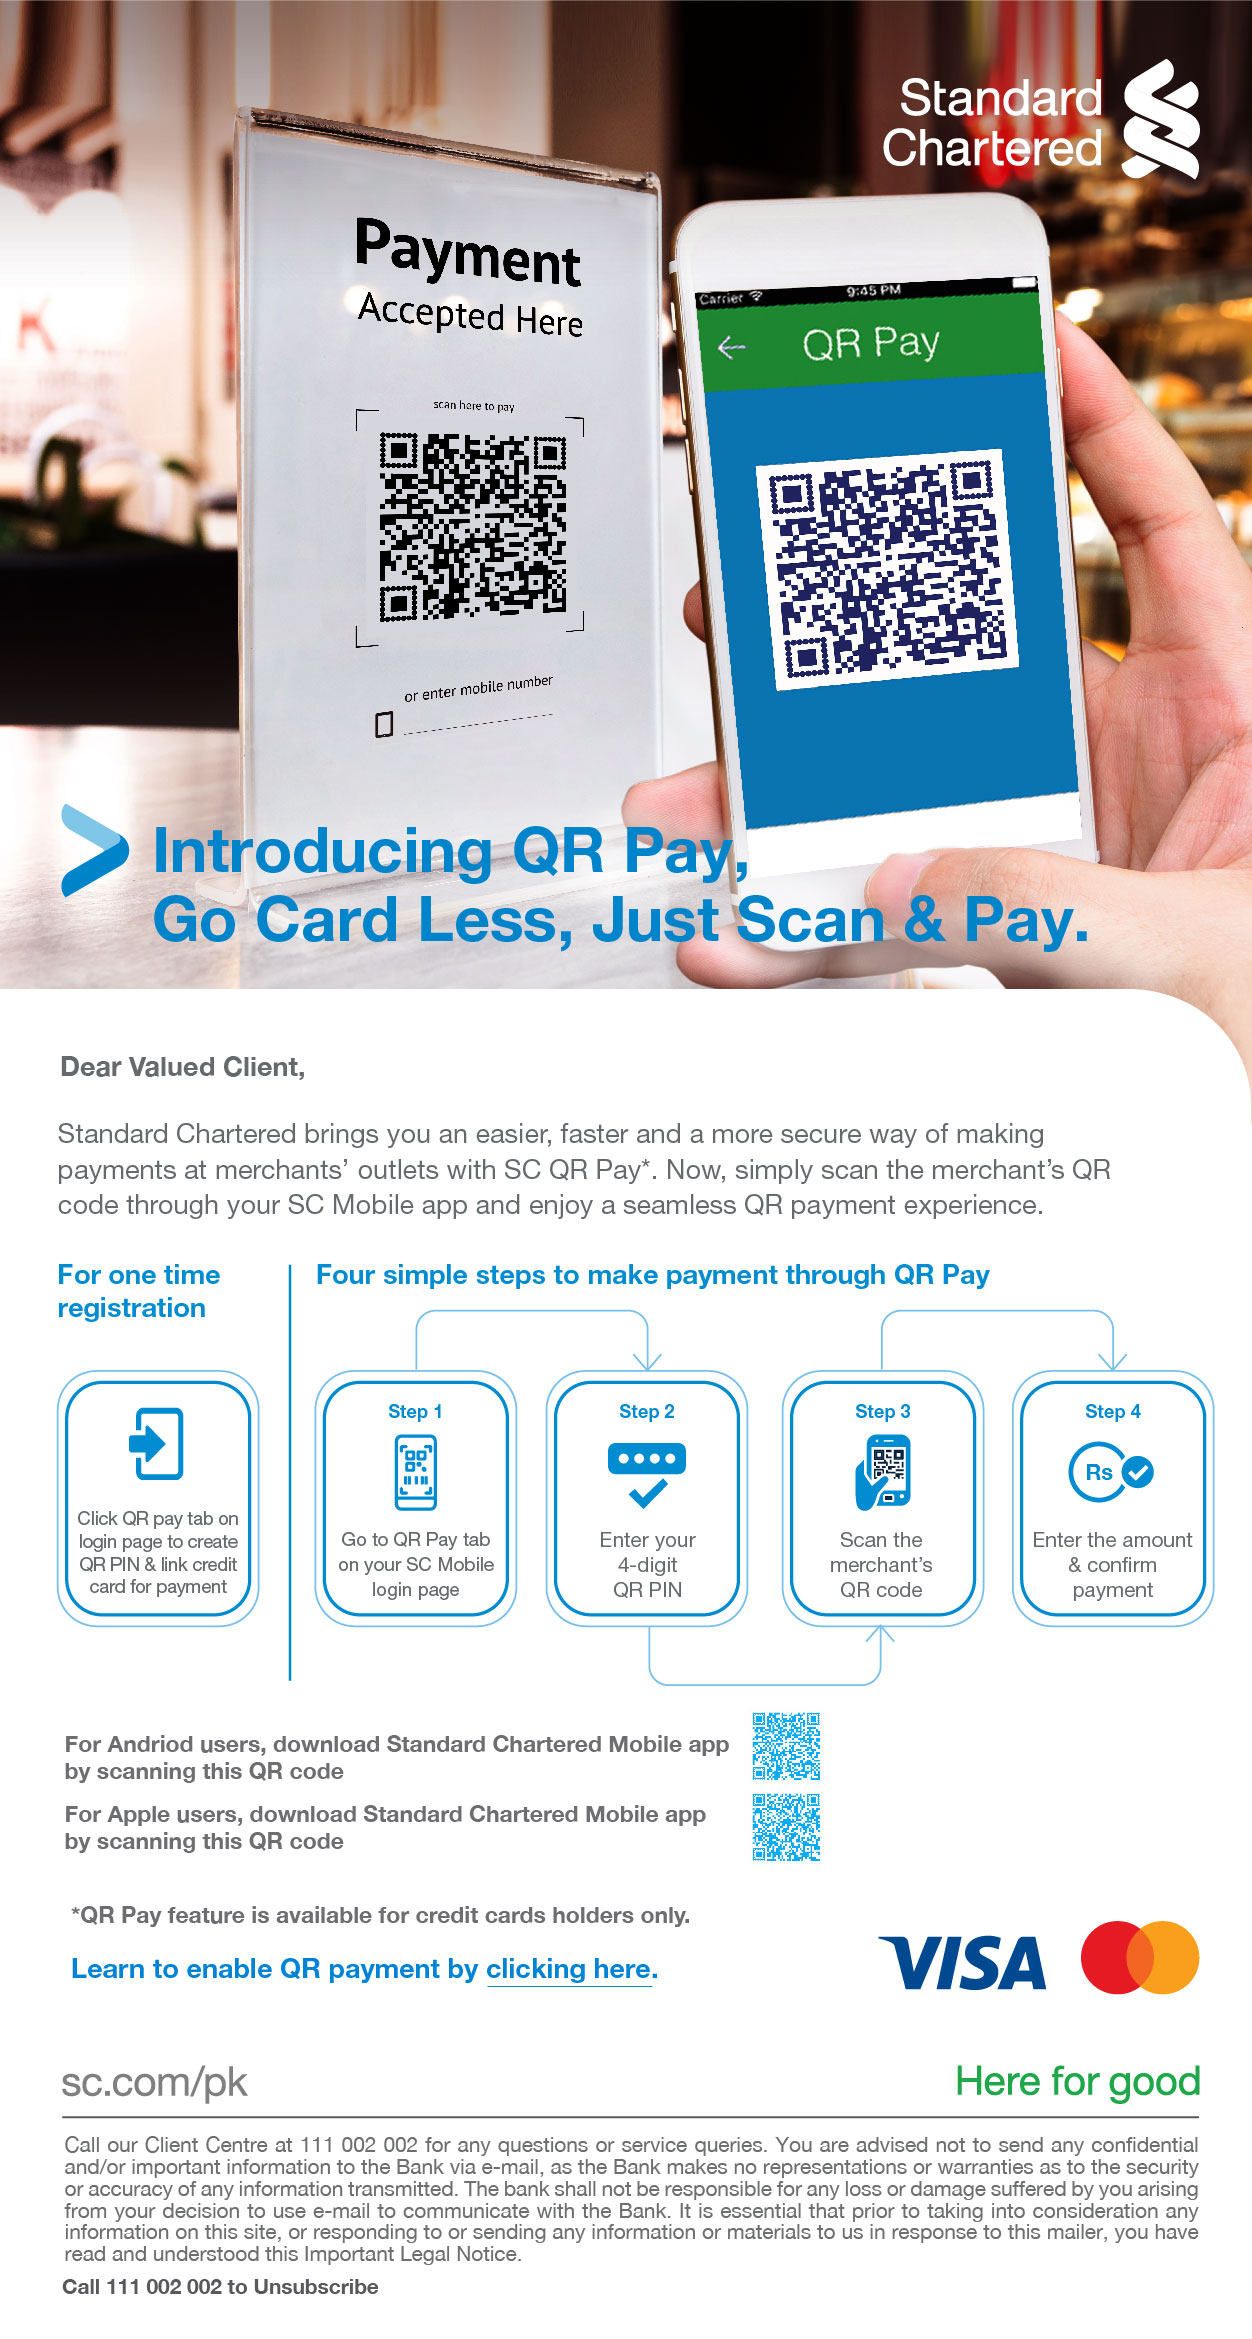 Standard Chartered Bank Credit Card Payment